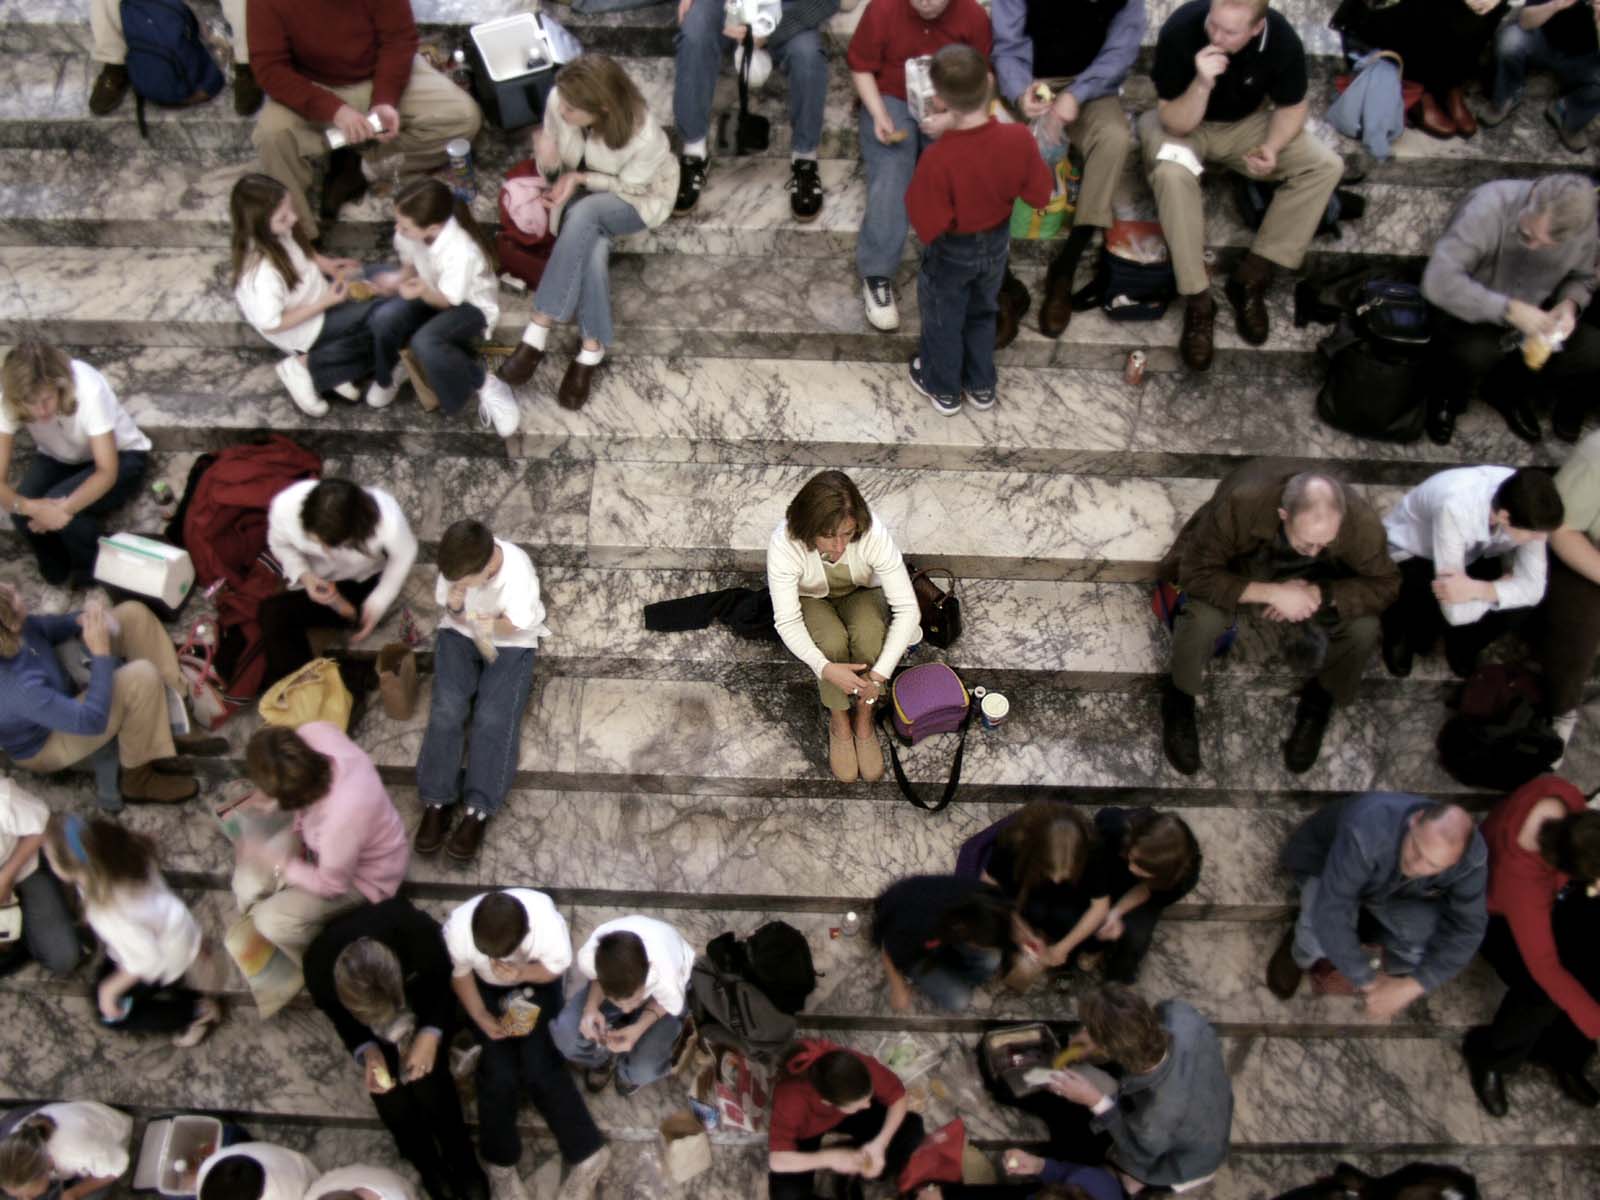 A lot of people sitting on steps. A woman in the middle of crowd appears alone.